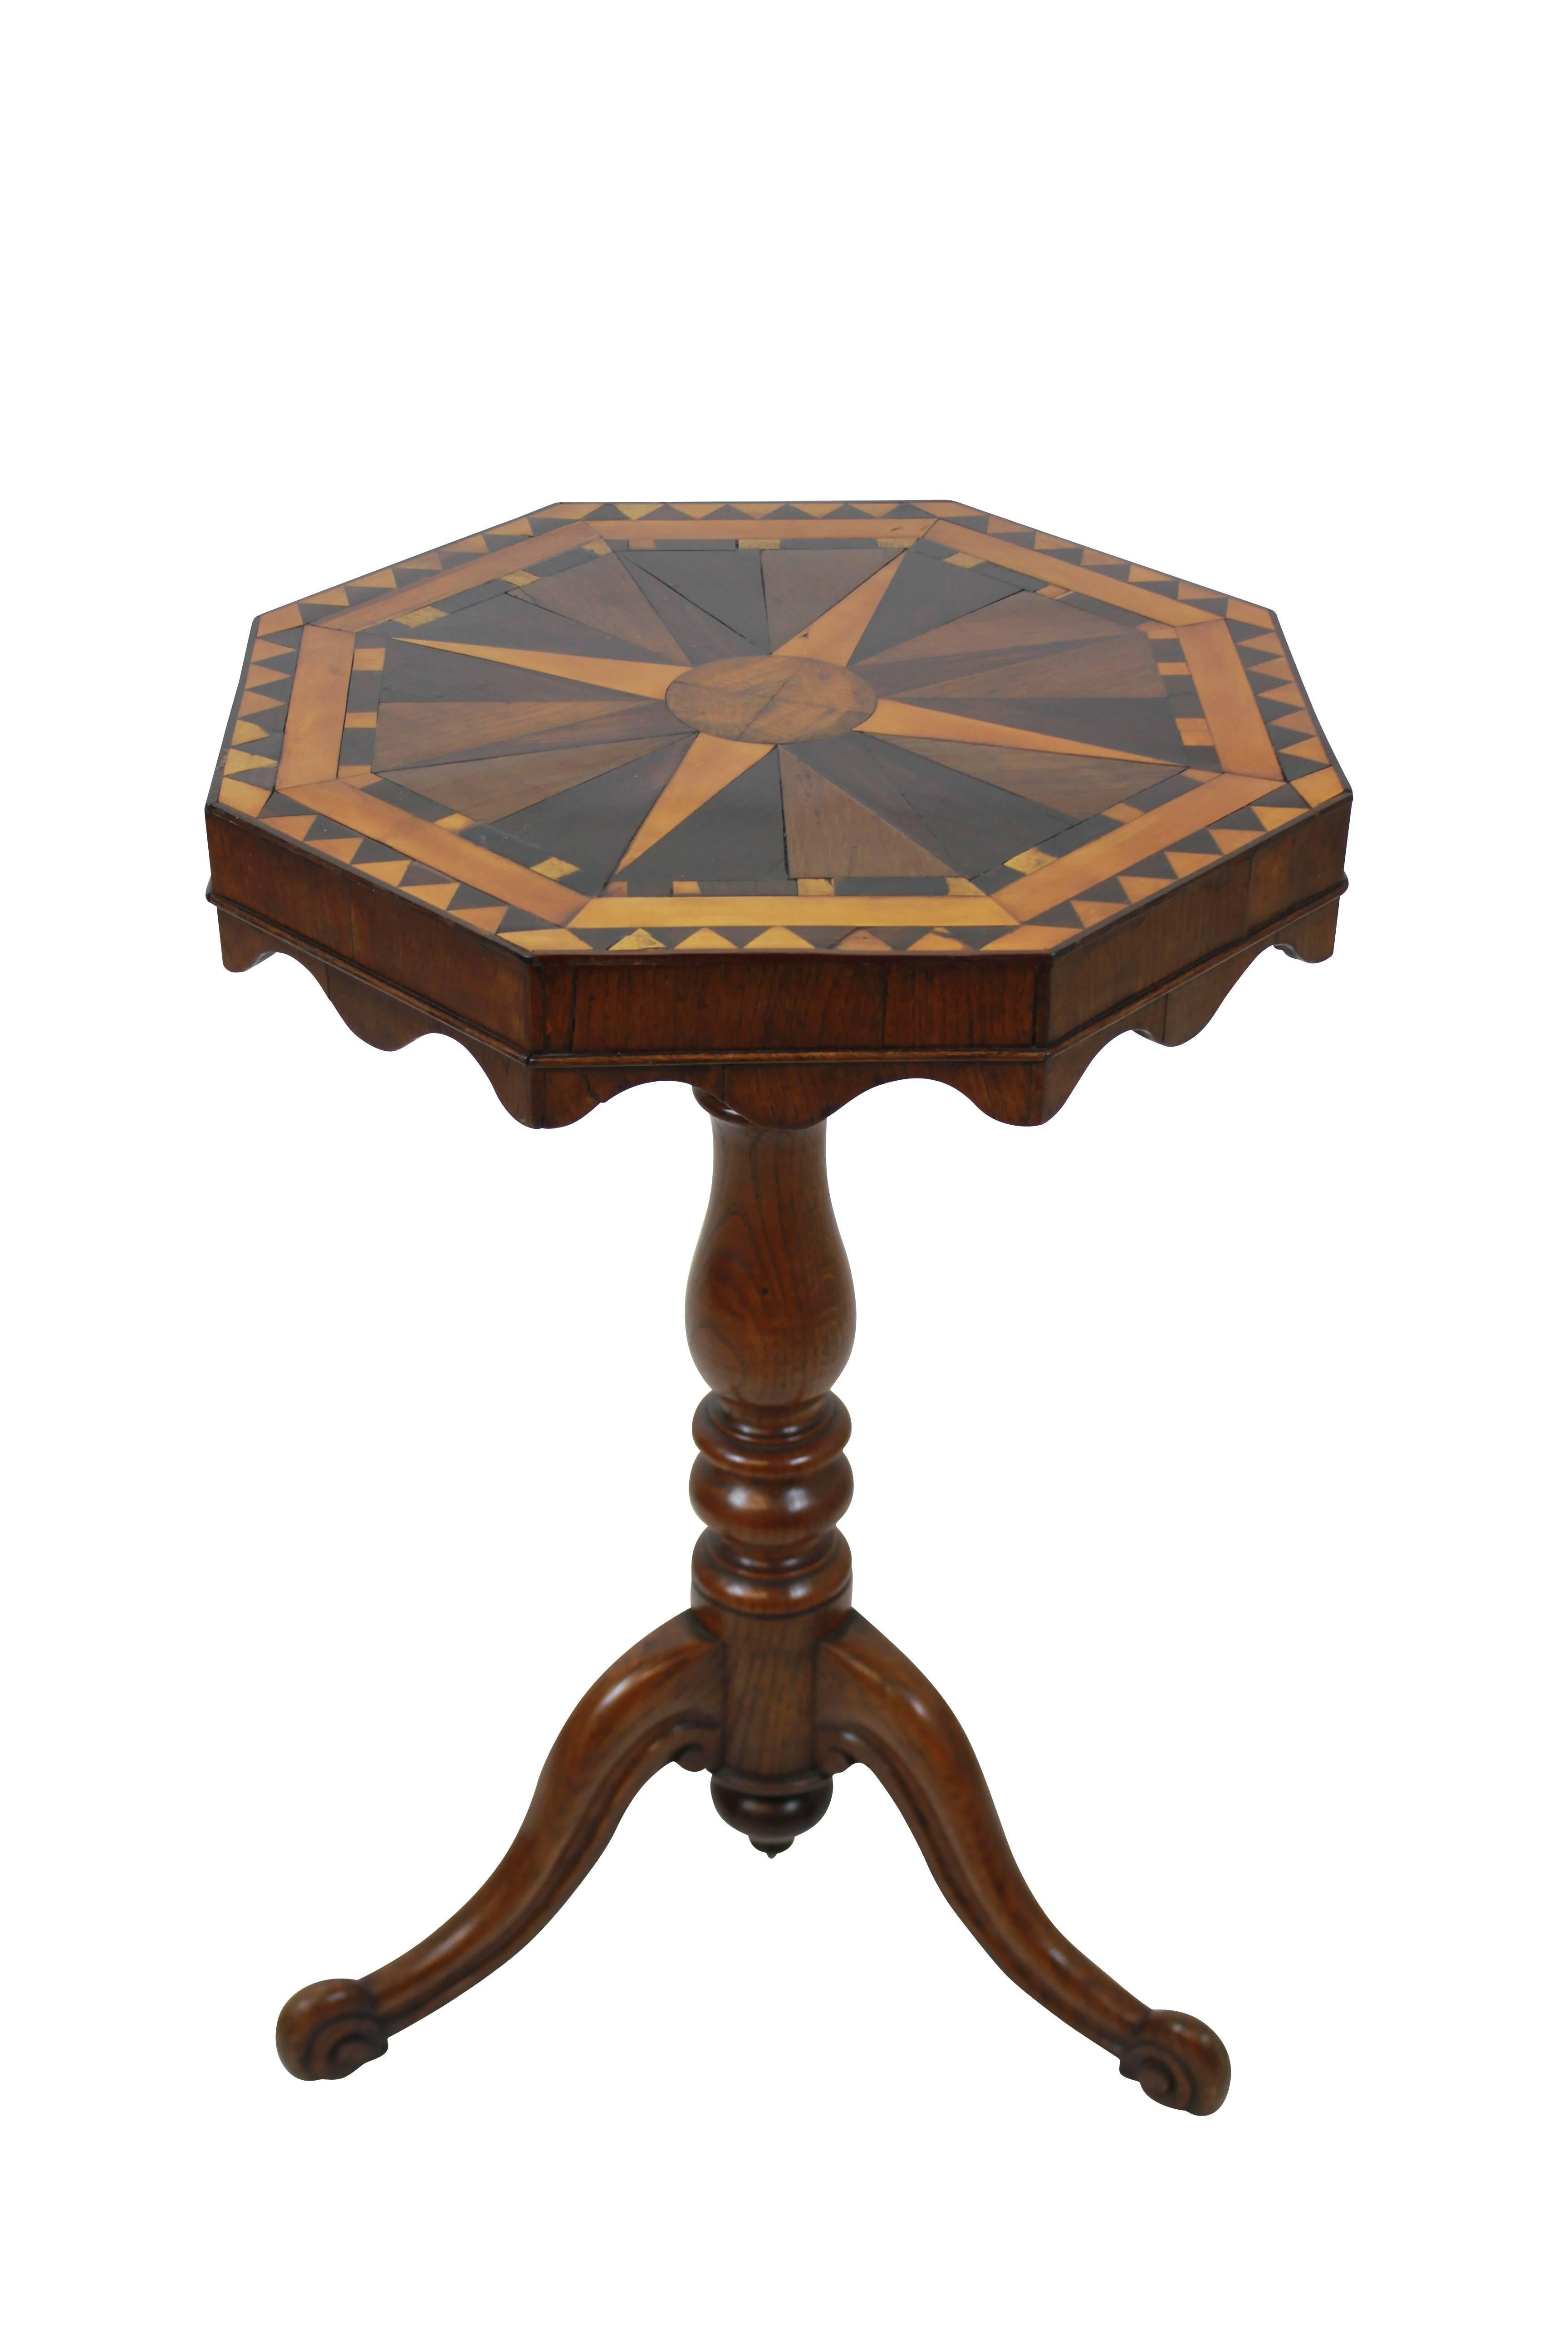 An English pedestal tilt-top table in elm with a fine geometric marquetry top in various English woods depicting a globe and compass. The turned tripod base supporting a tilt top with scalloped apron with original latch.
 